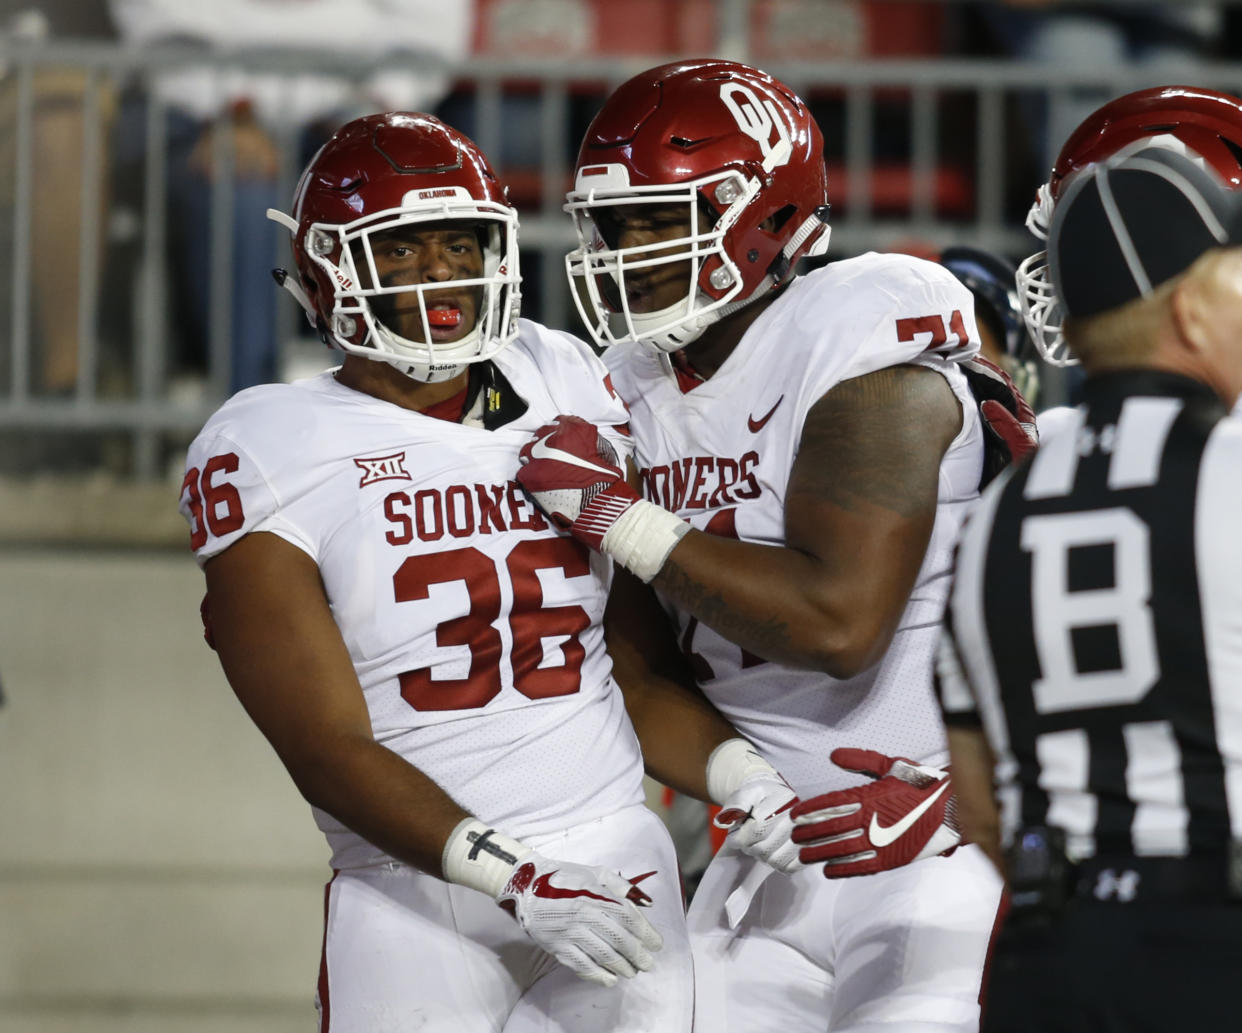 Oklahoma running back Dimitri Flowers, left, celebrates his touchdown against Ohio State with teammate Bobby Evans during the second half of an NCAA college football game, Saturday, Sept. 9, 2017, in Columbus, Ohio. (AP Photo/Paul Vernon)